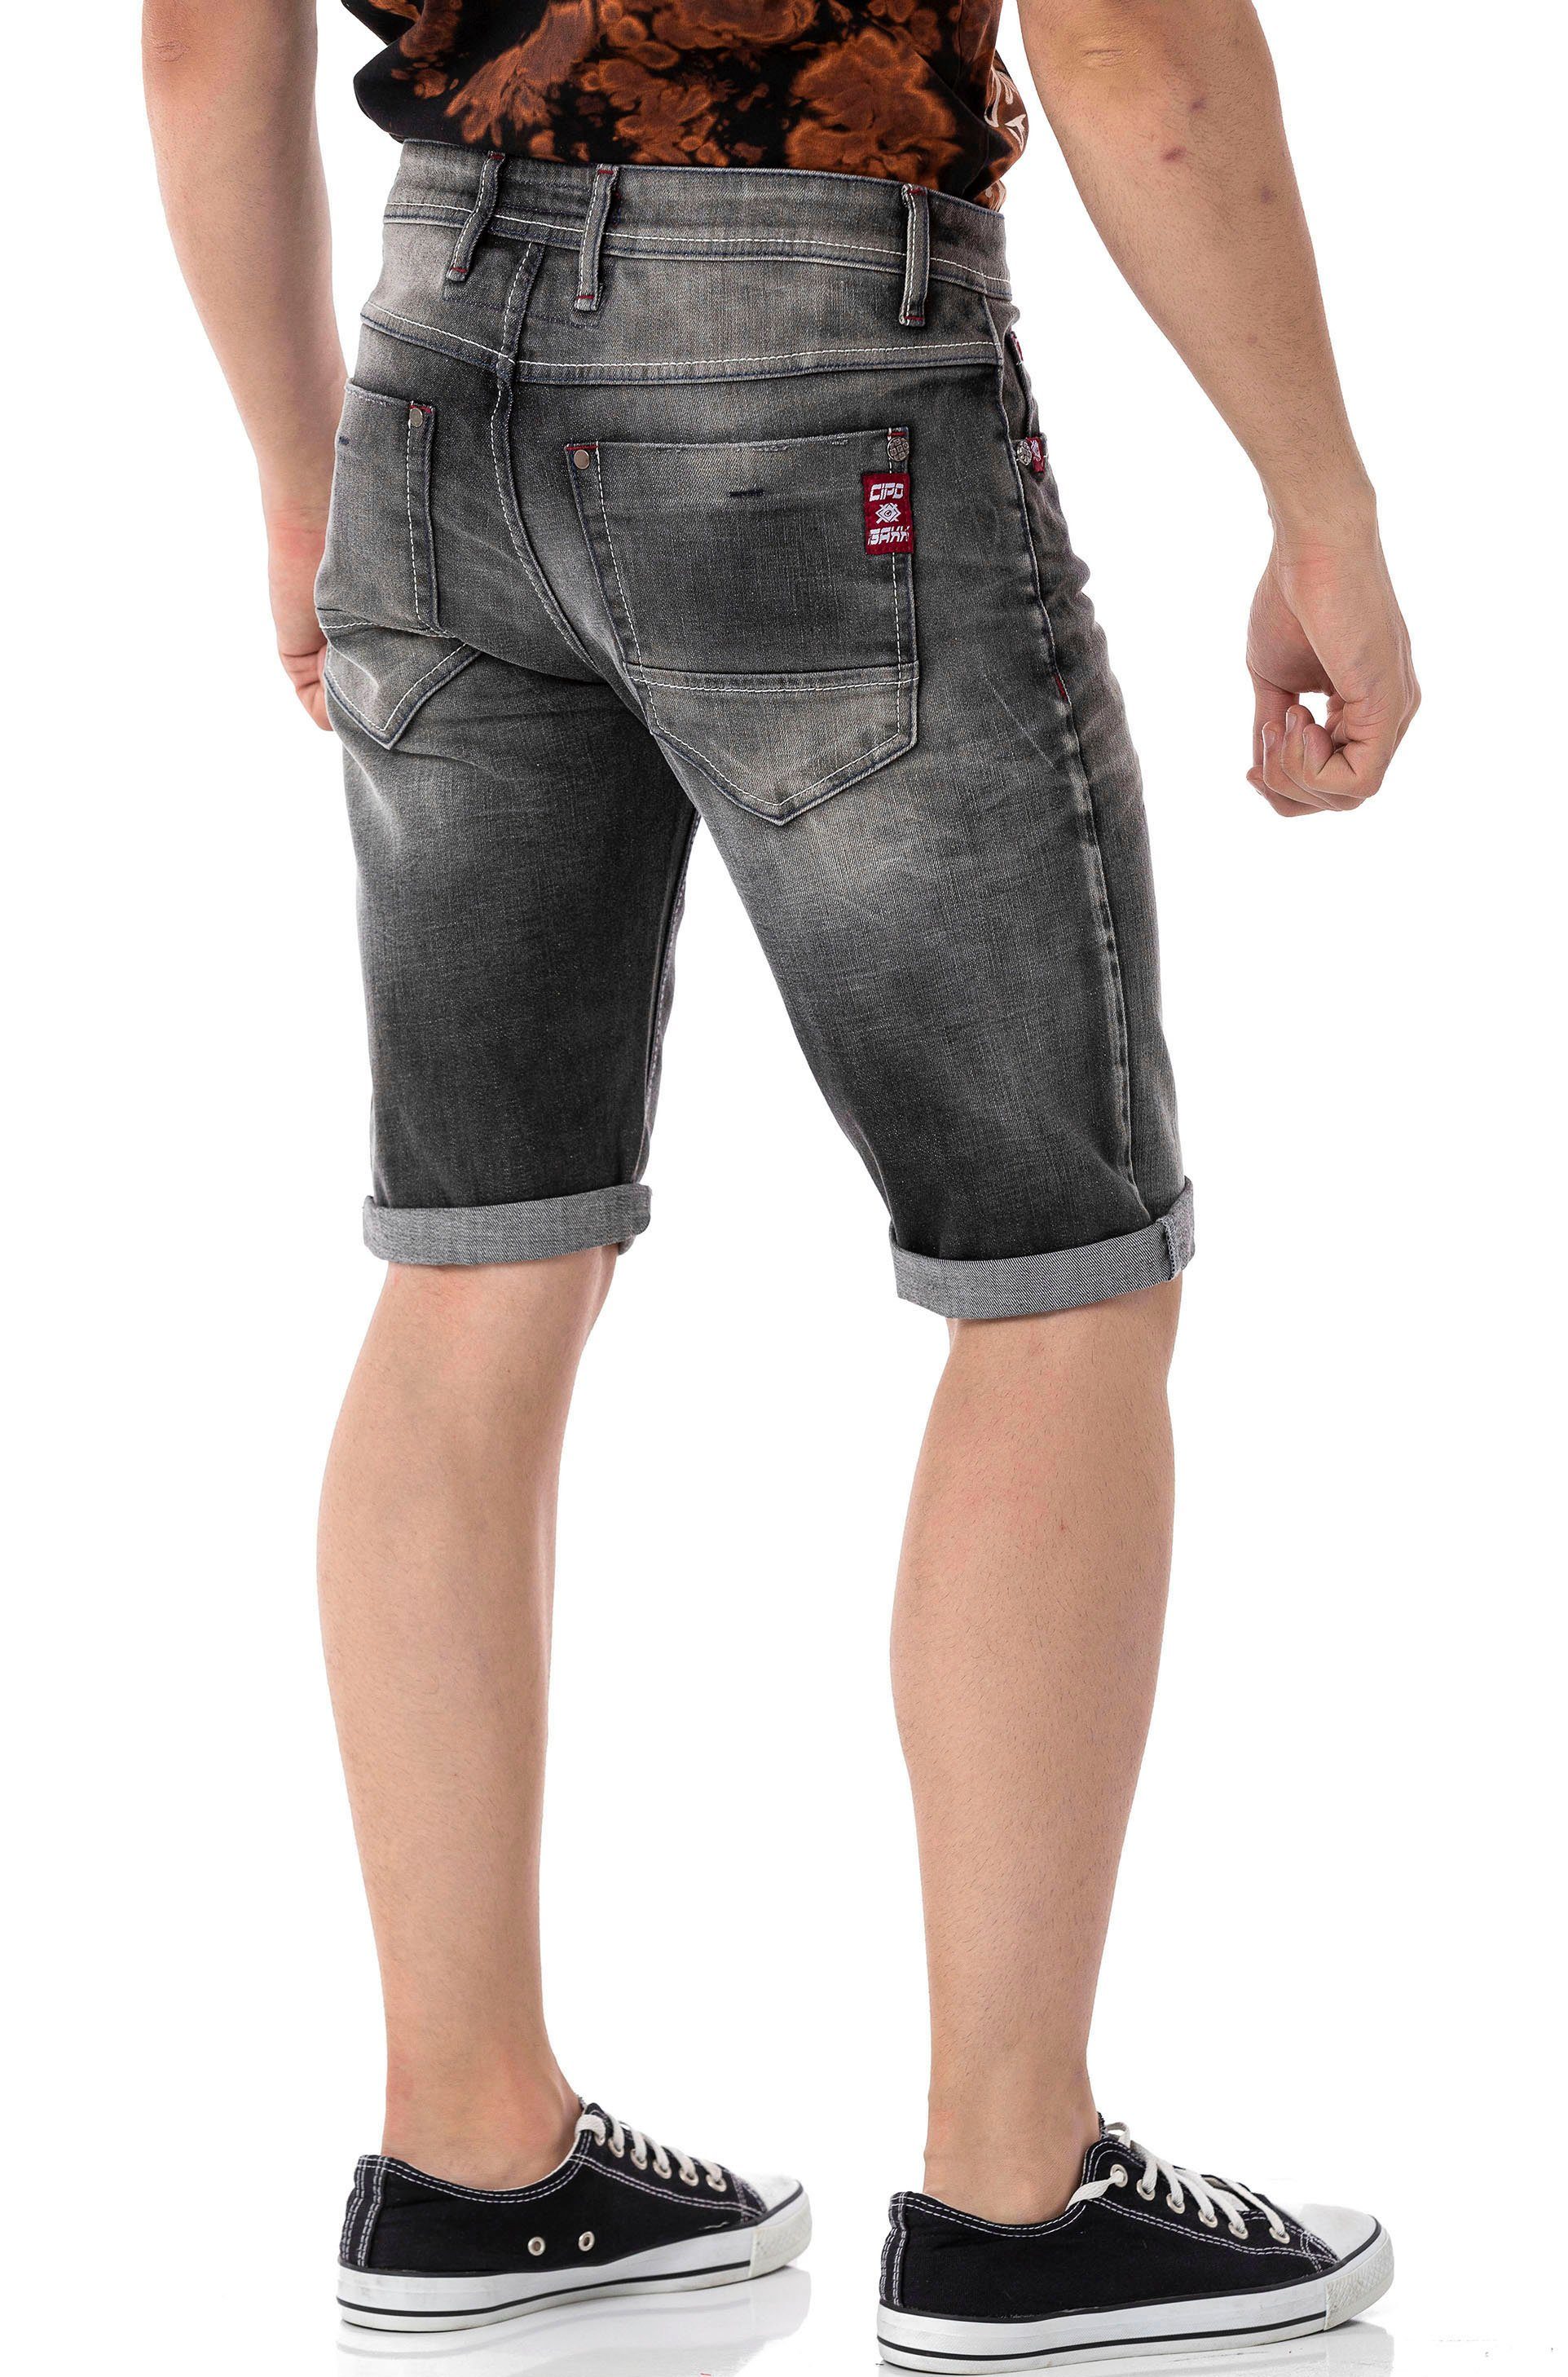 Cipo & Baxx Jeansshorts black used